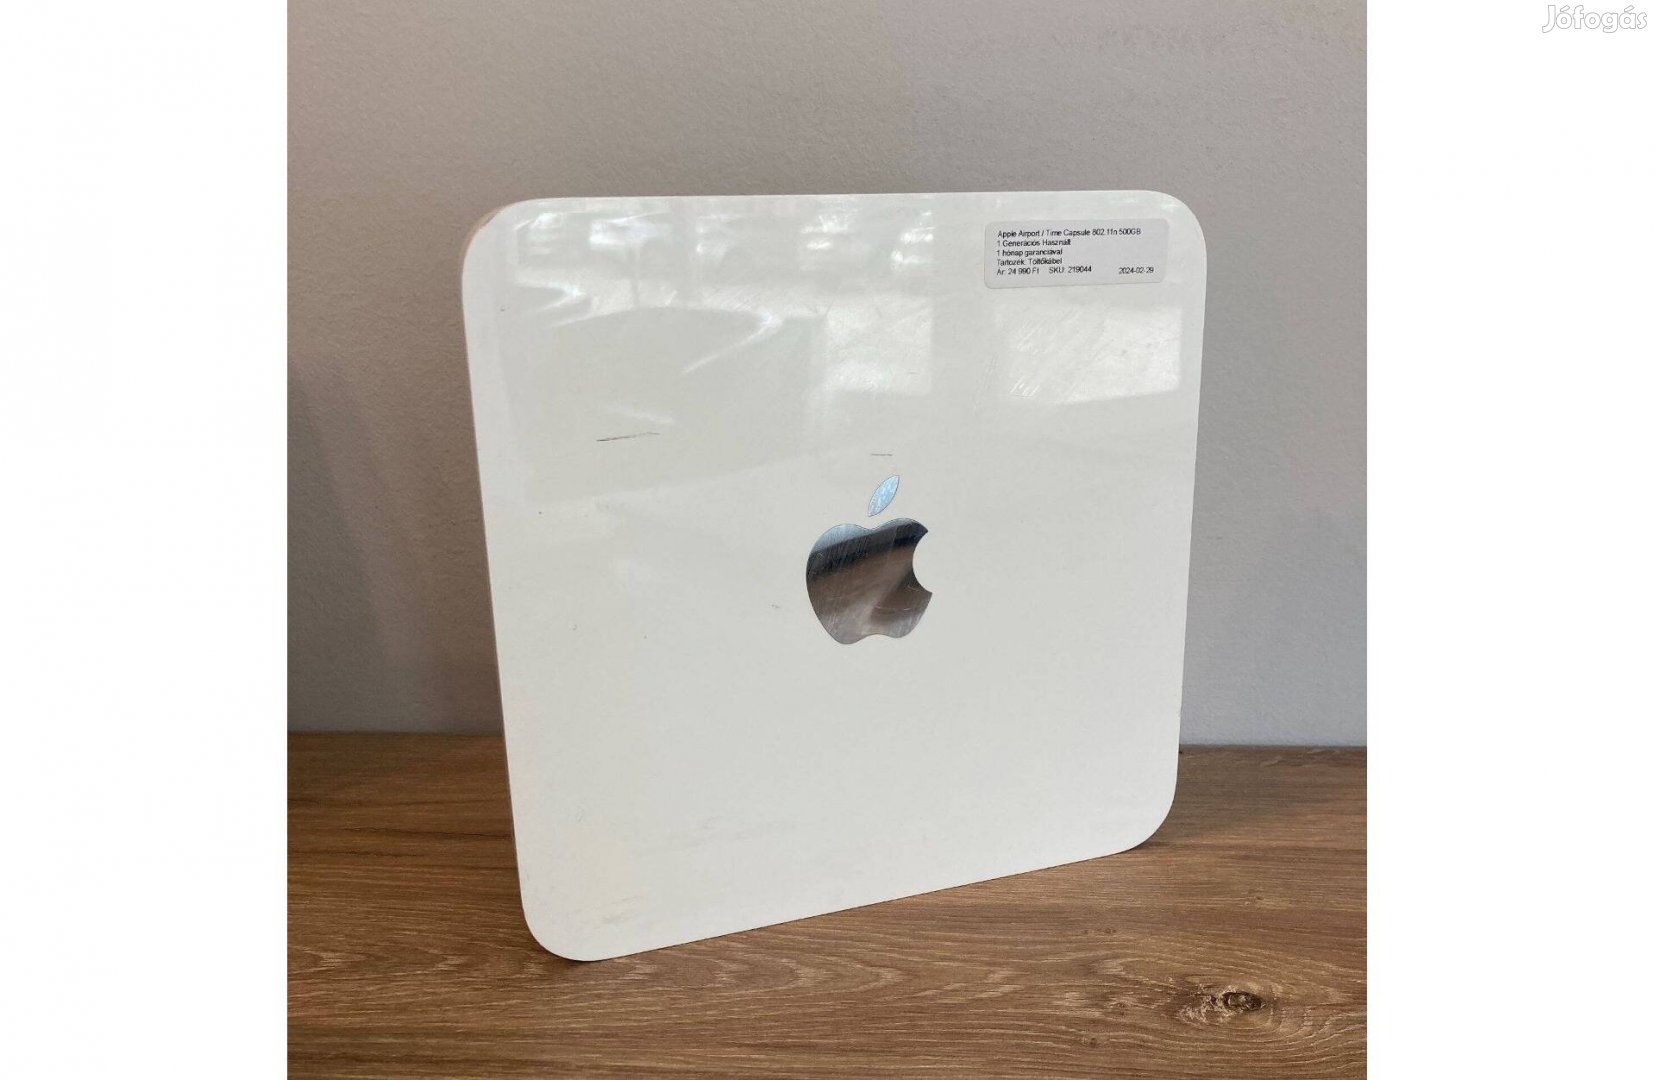 Airport Time Capsule 1 Wifi Router 500GB 802.11n